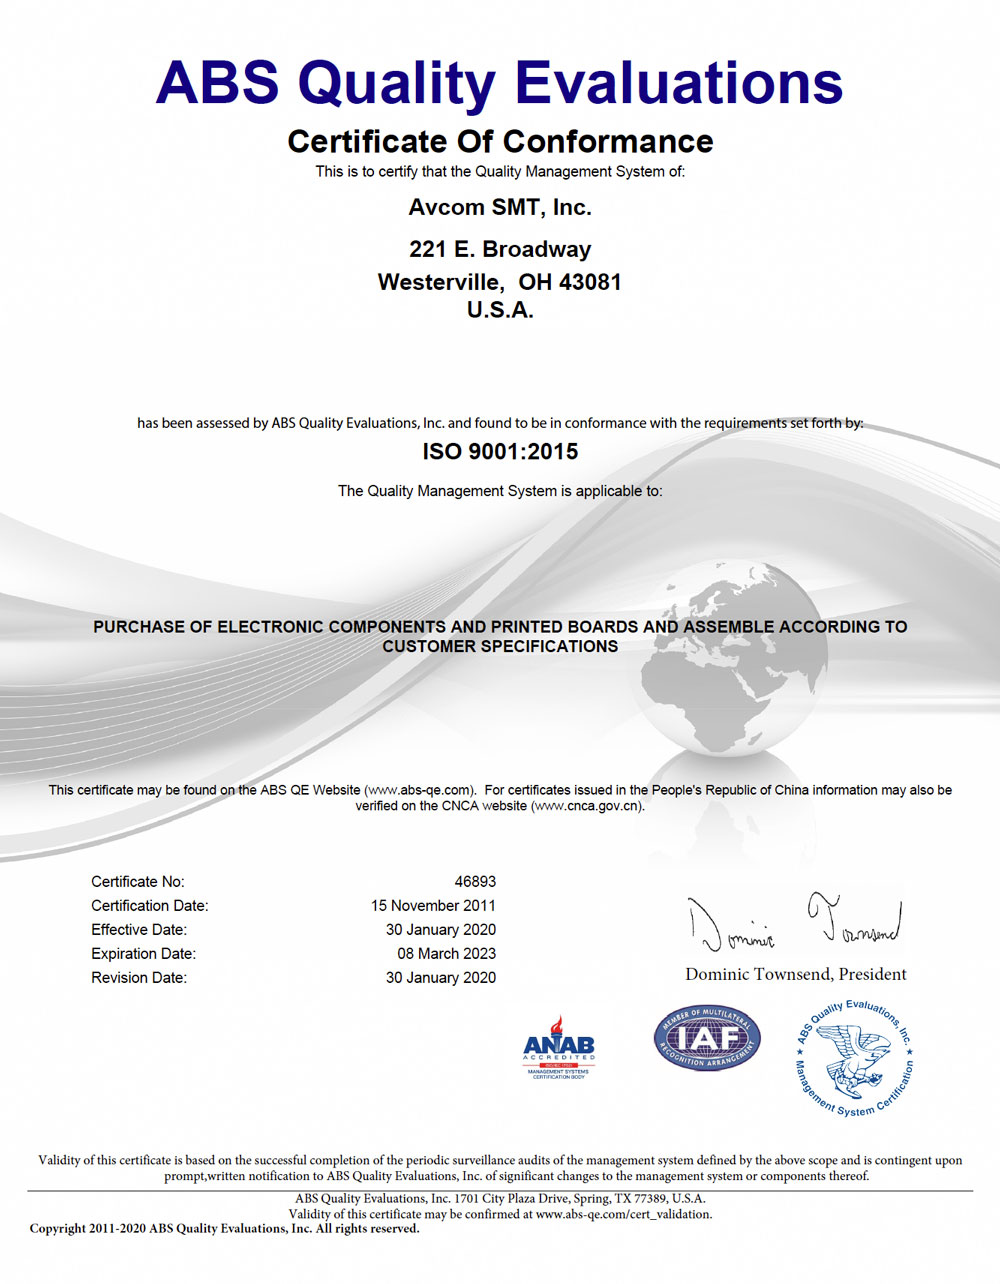 ABS Quality Evaluation-Certificate-30JAN2020